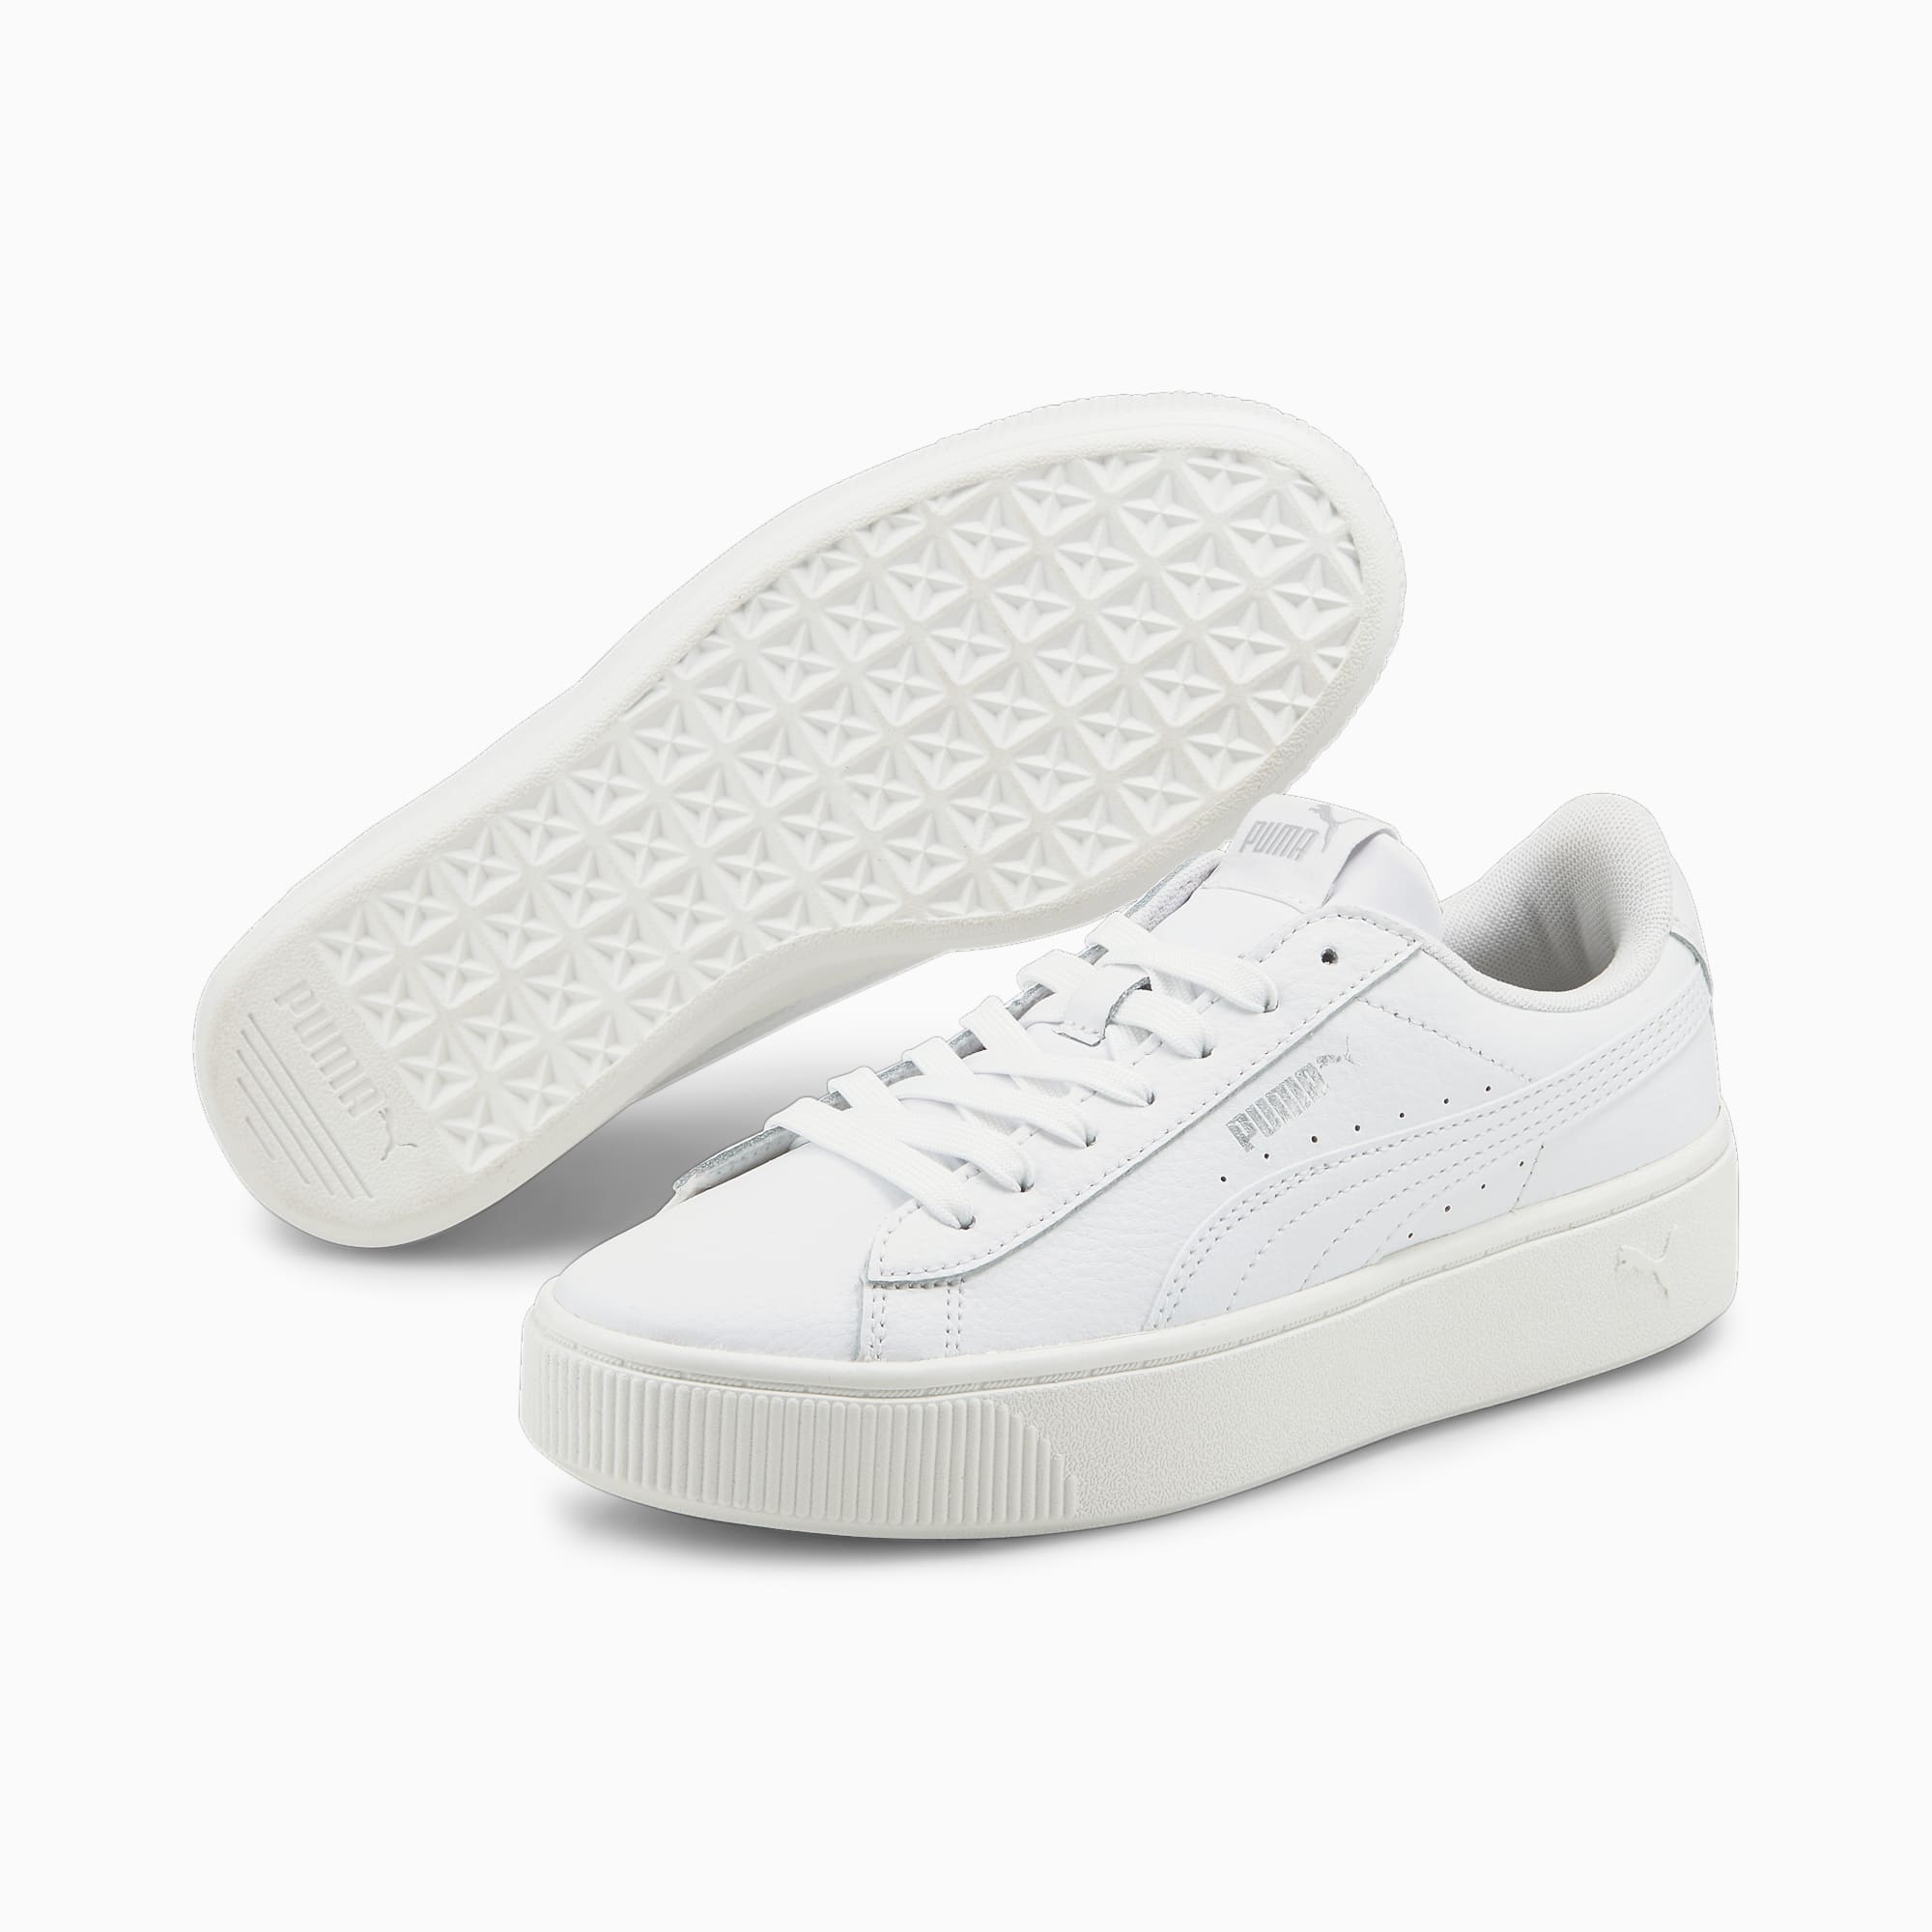 PUMA Vikky Stacked Sneakers Damen